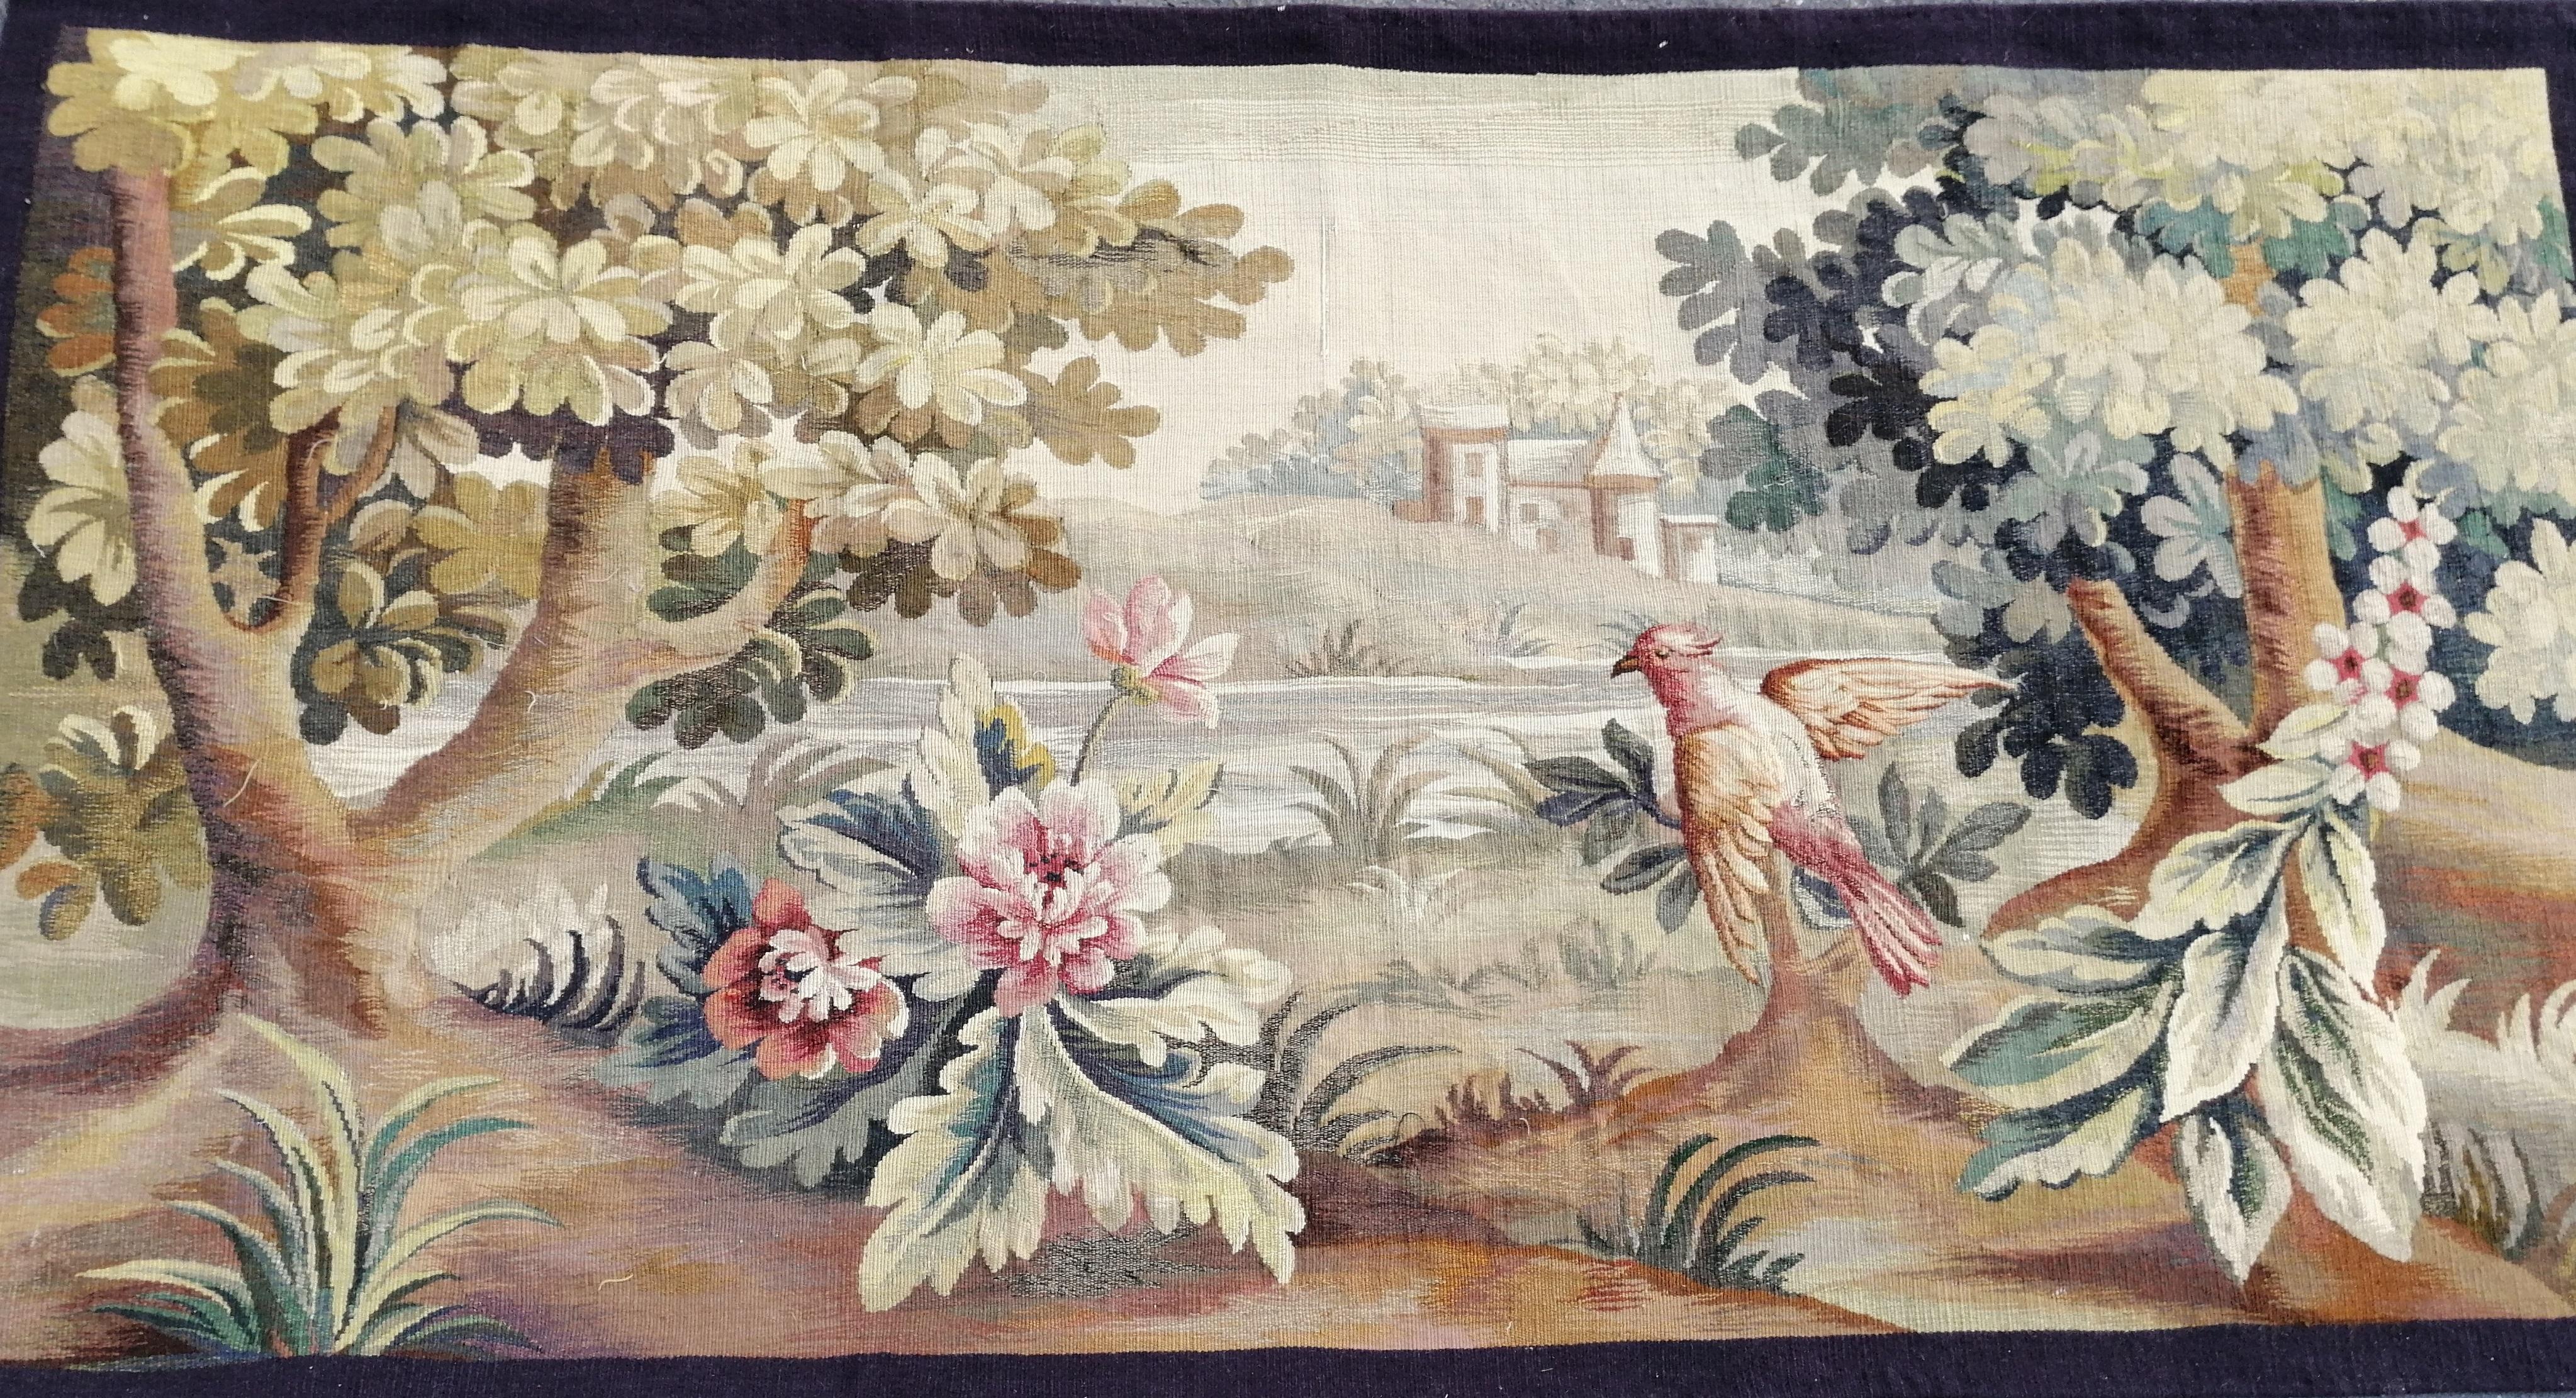 This 19th century French Verdure Tapestry, circa 1890s, is exquisite. It is made of wool and silk, and hangs from a metal tapestry rod with rings or vlcro. The scene is framed by beautiful trees and bird.